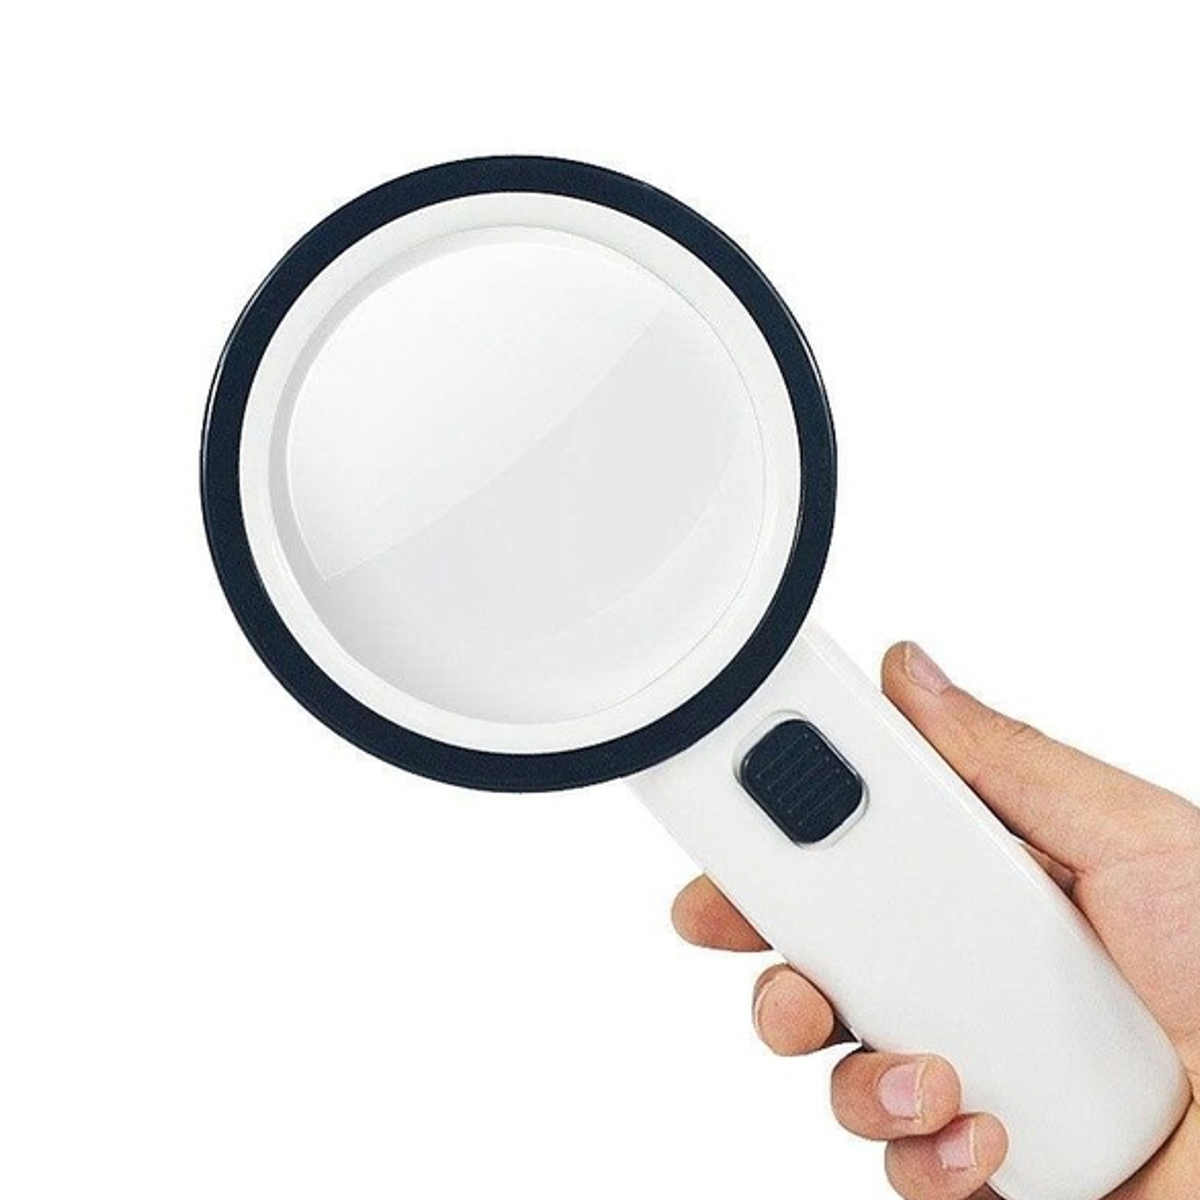 Illuminated 30x Magnifier Handheld 12-LED Lighted Magnifying Glass